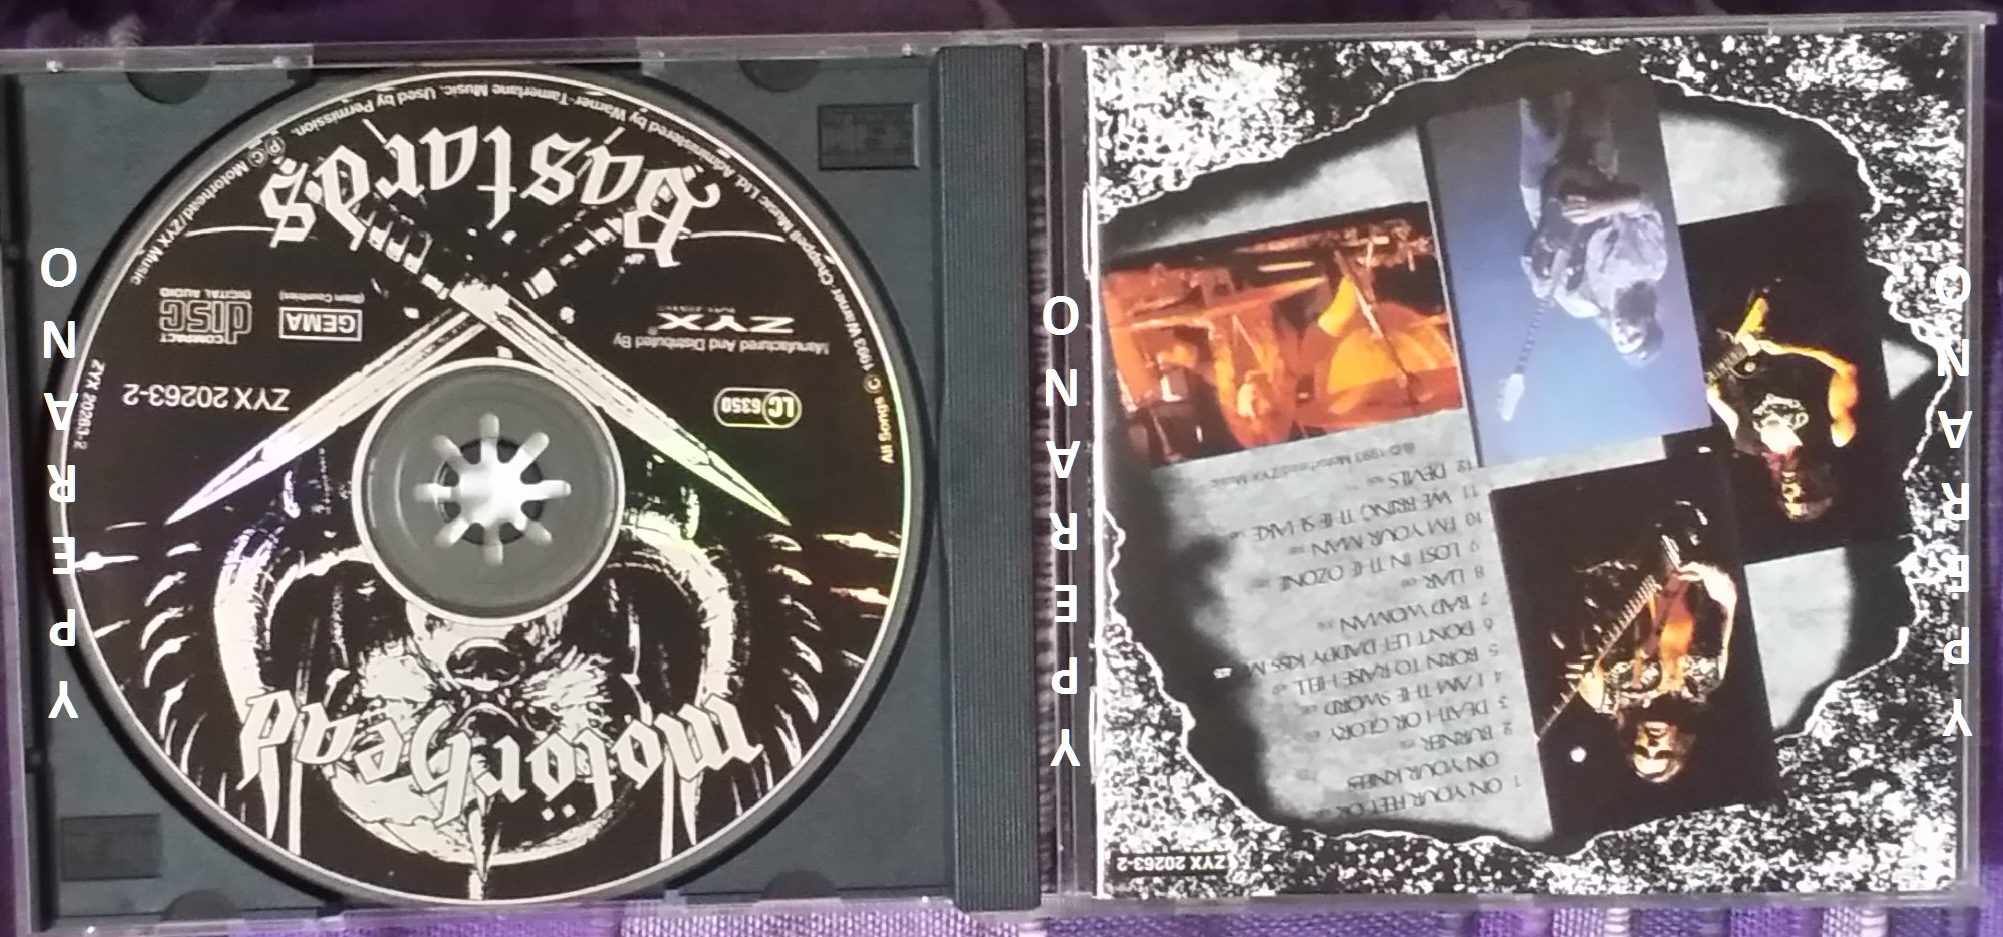 MADE IN GERMANY MOTÖRHEAD BASTARDS 12 TRACK CD ON ZYX LABEL FROM 1993 